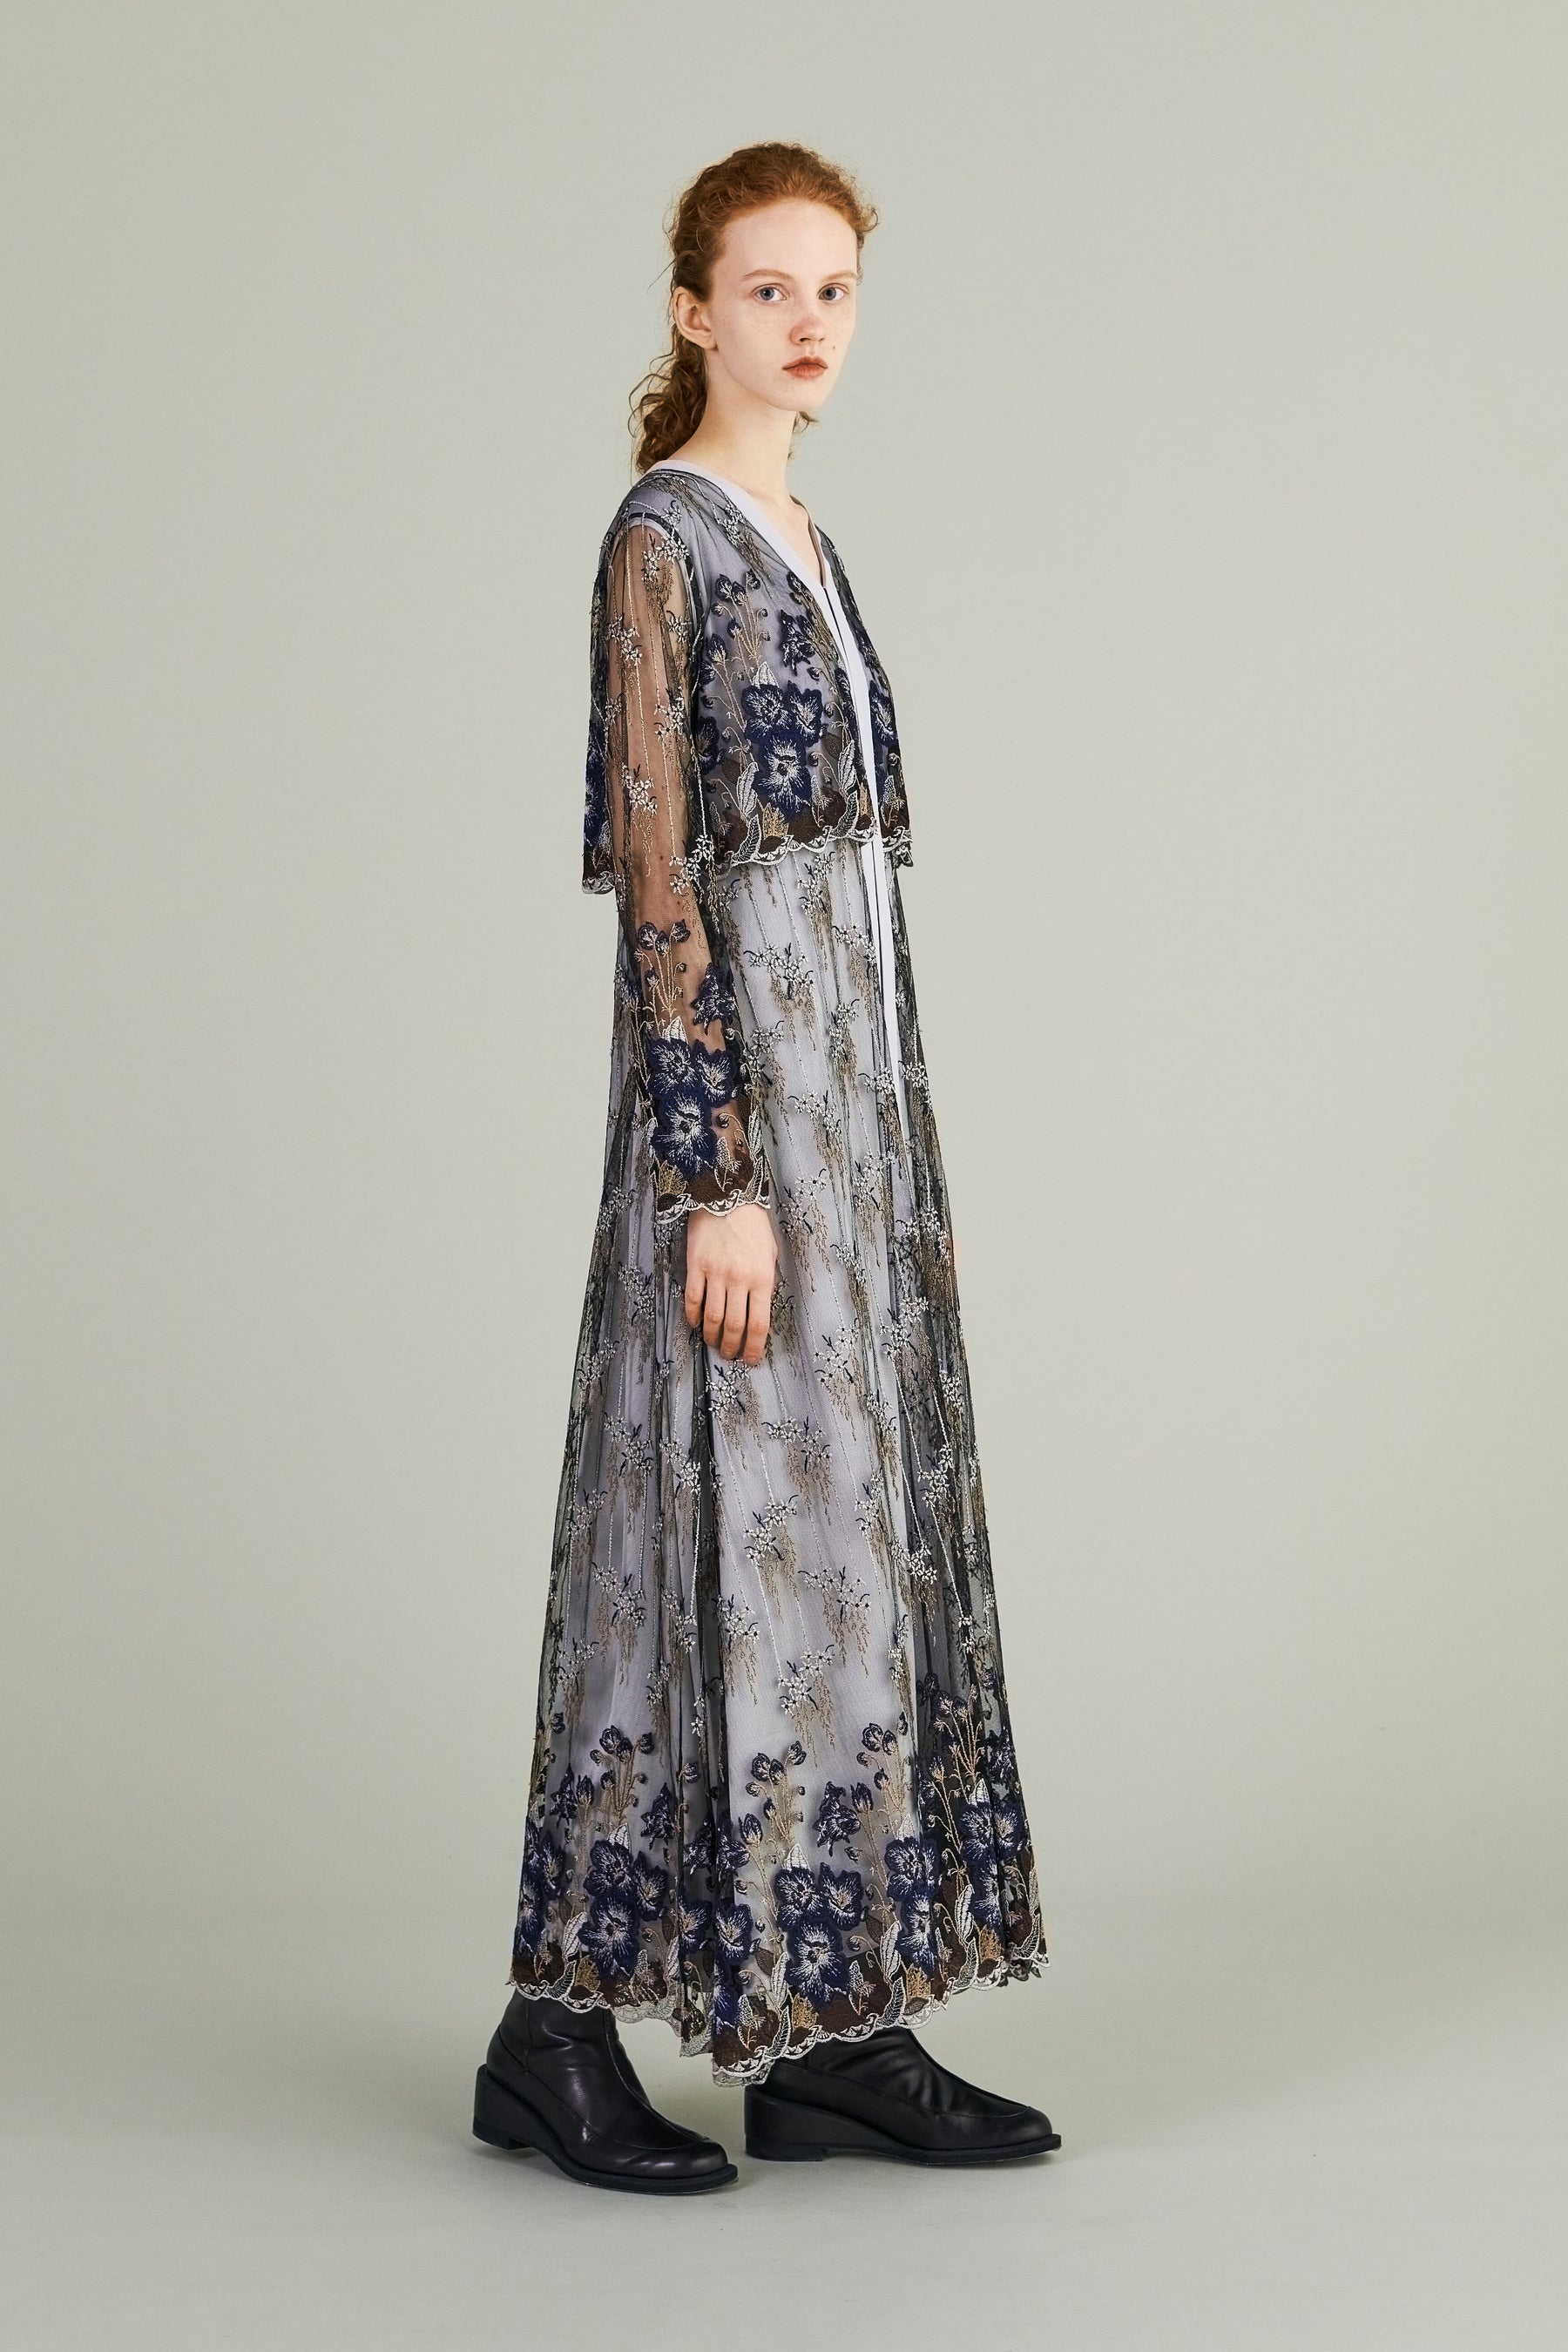 MURRAL Everlasting embroidery lace dress